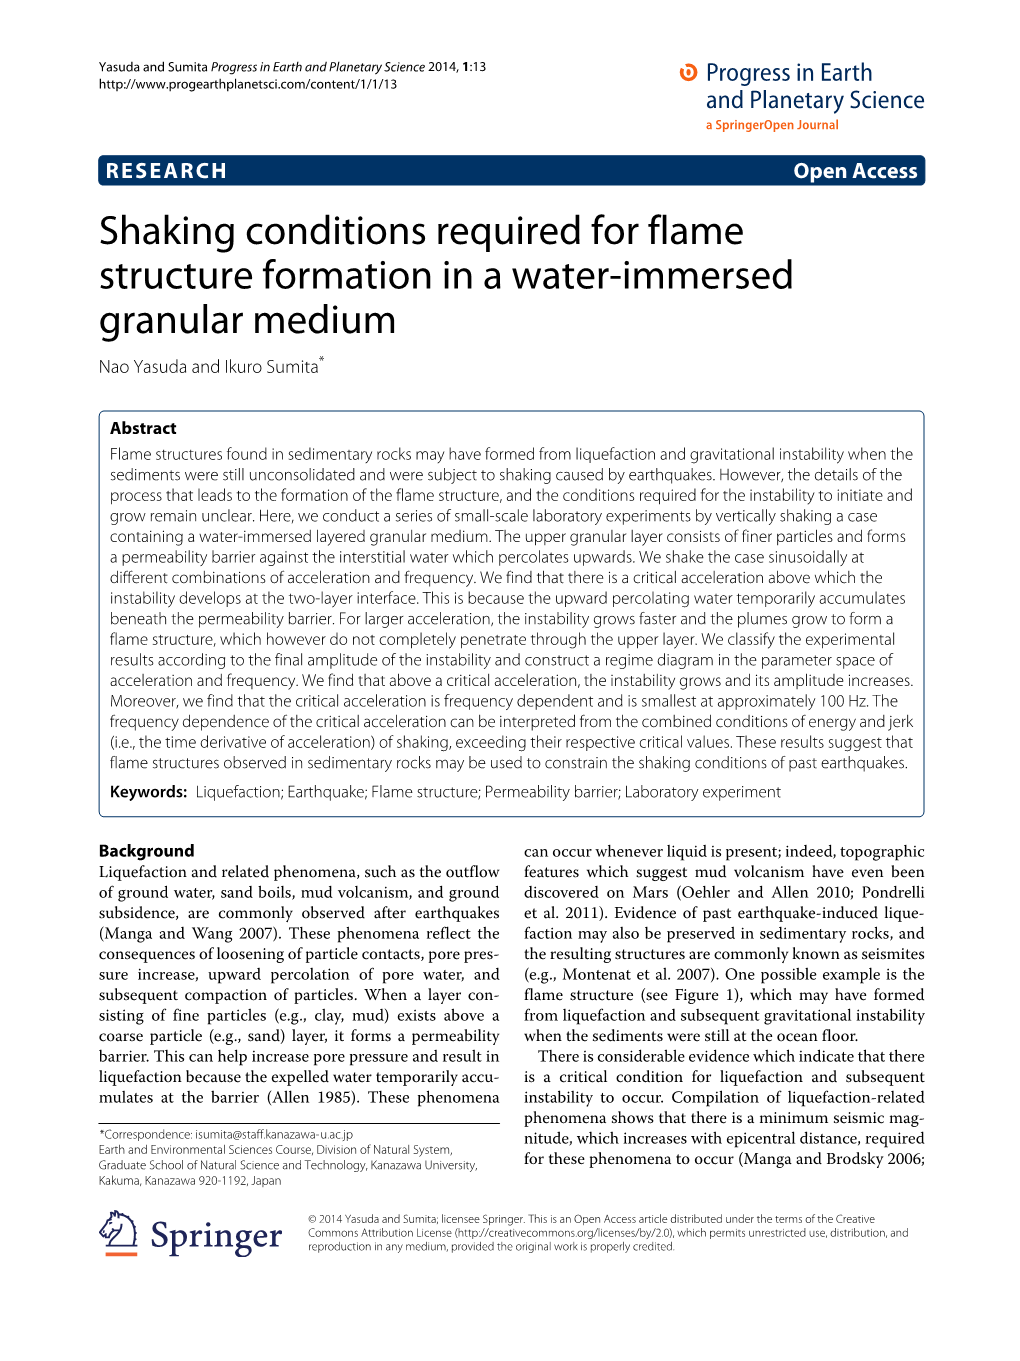 Shaking Conditions Required for Flame Structure Formation in a Water-Immersed Granular Medium Nao Yasuda and Ikuro Sumita*